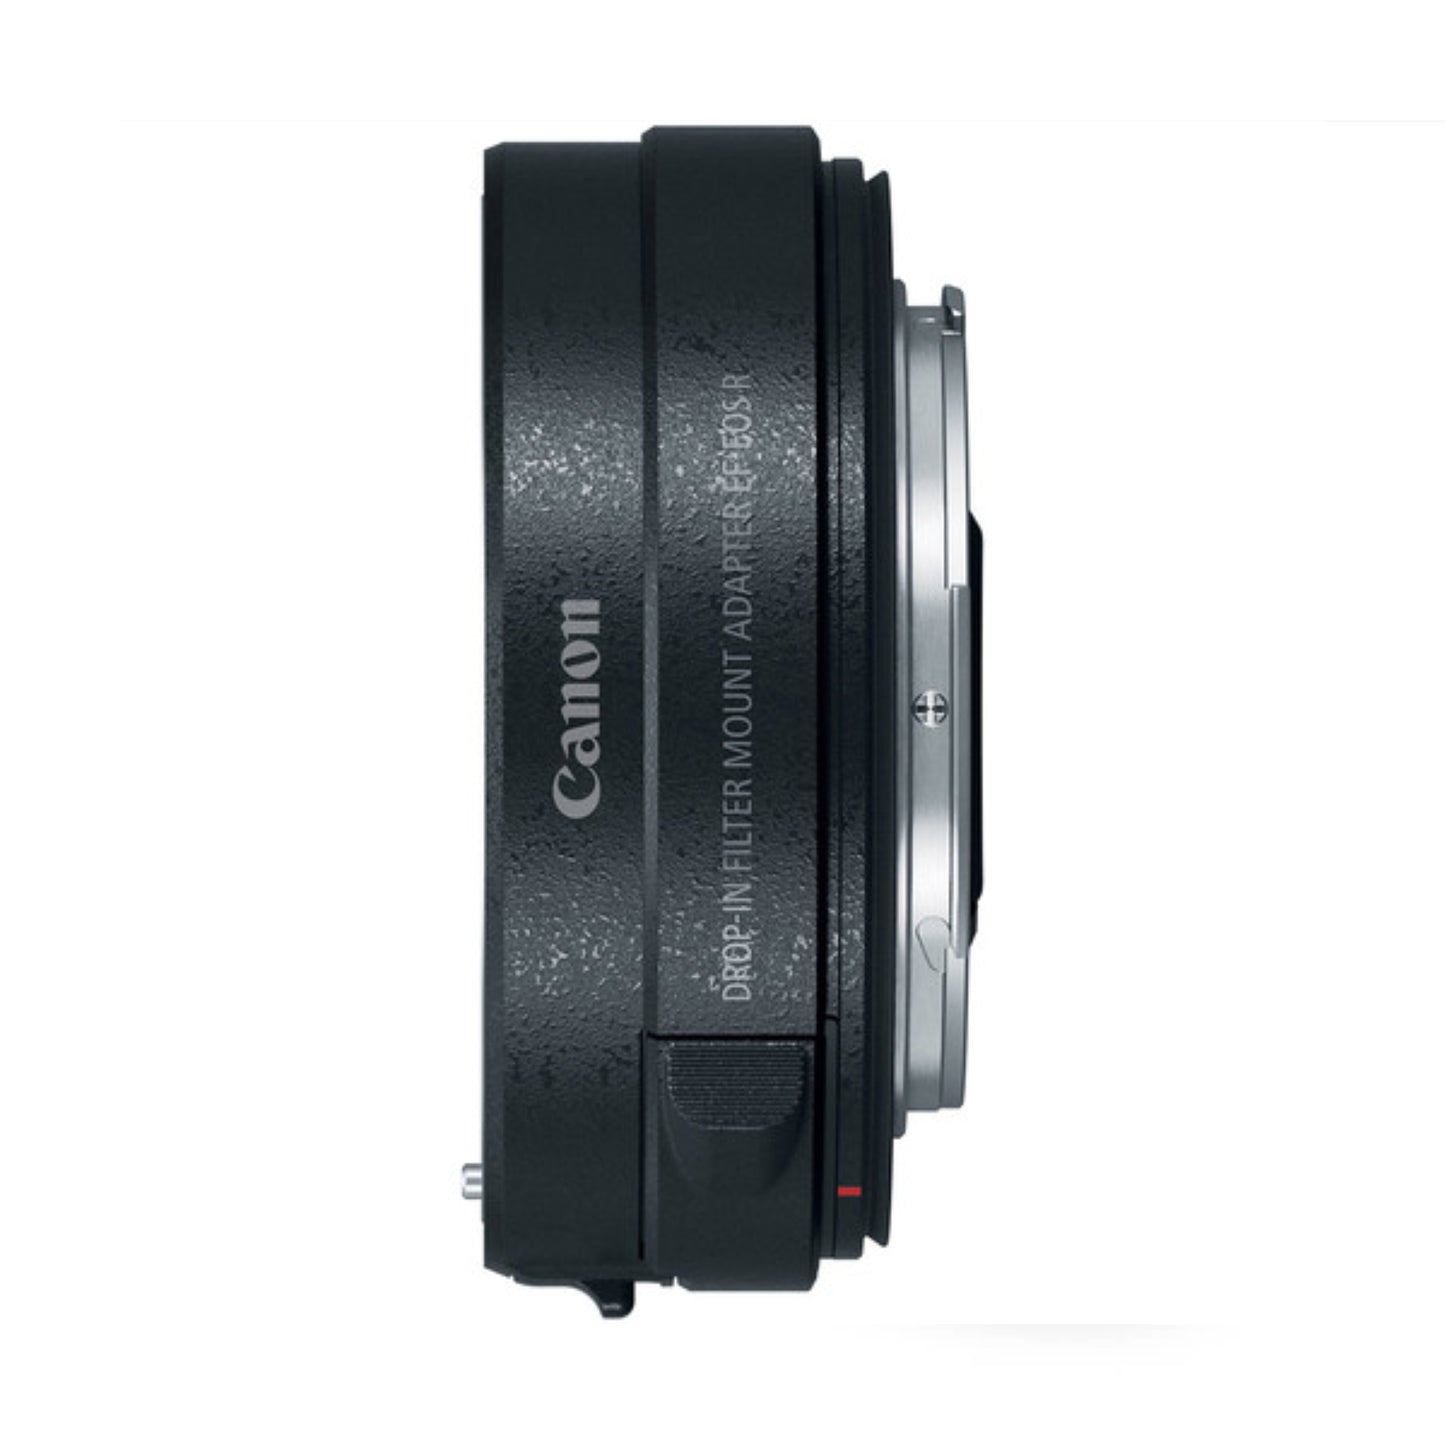 Canon Drop-In Filter Mount Adapter For hire at Topic Rentals